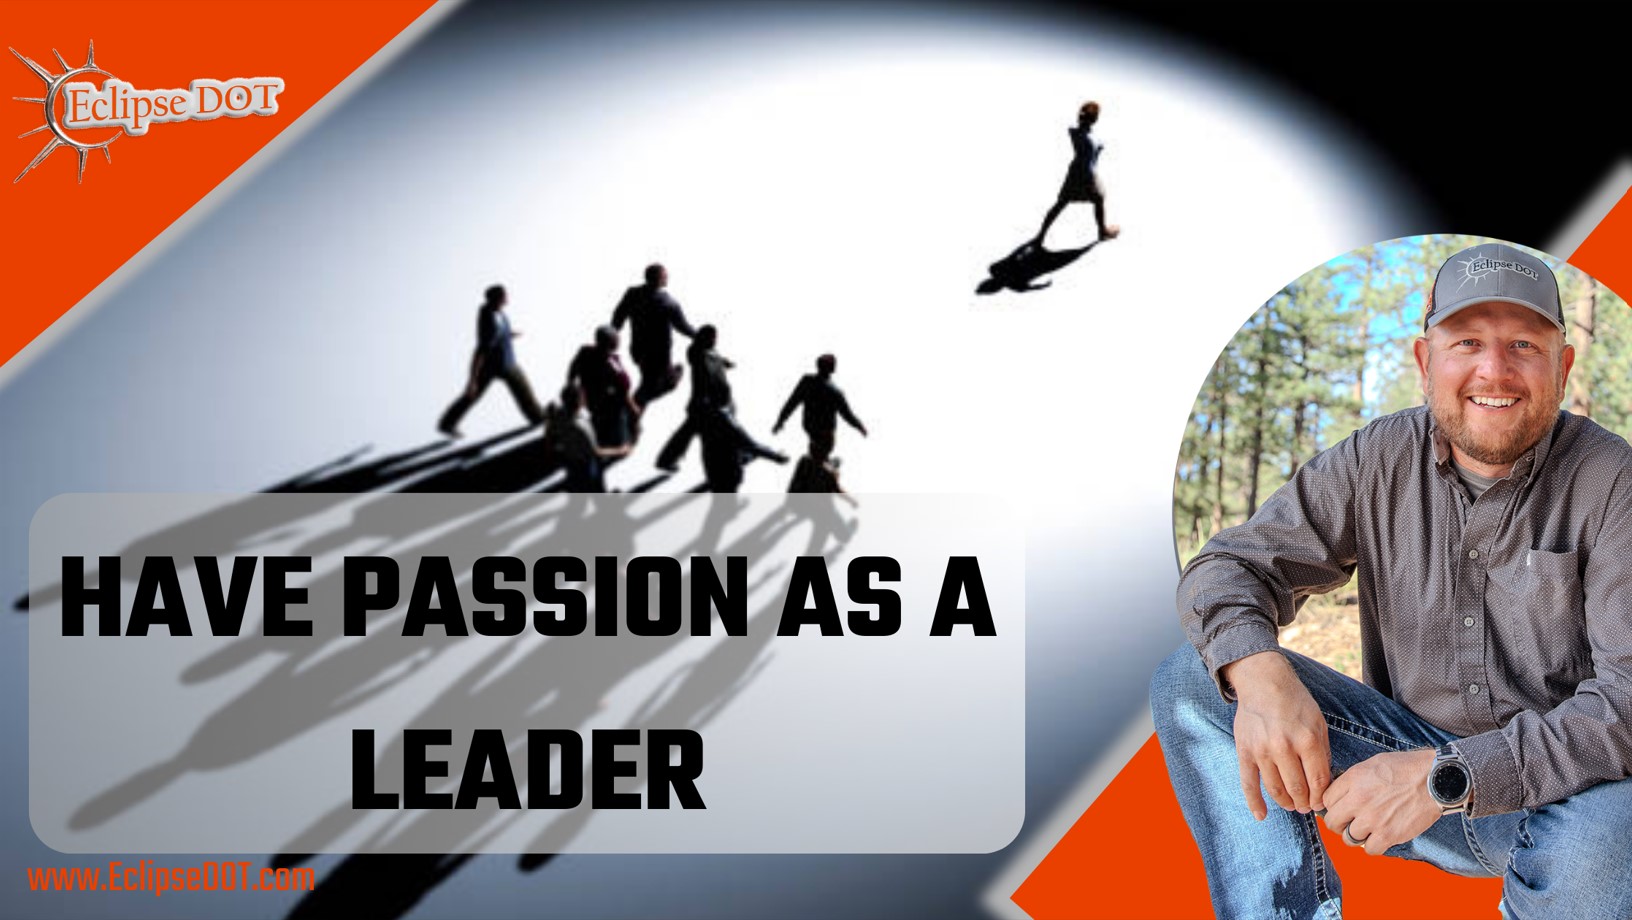 A passionate leader inspires and guides their team towards success.